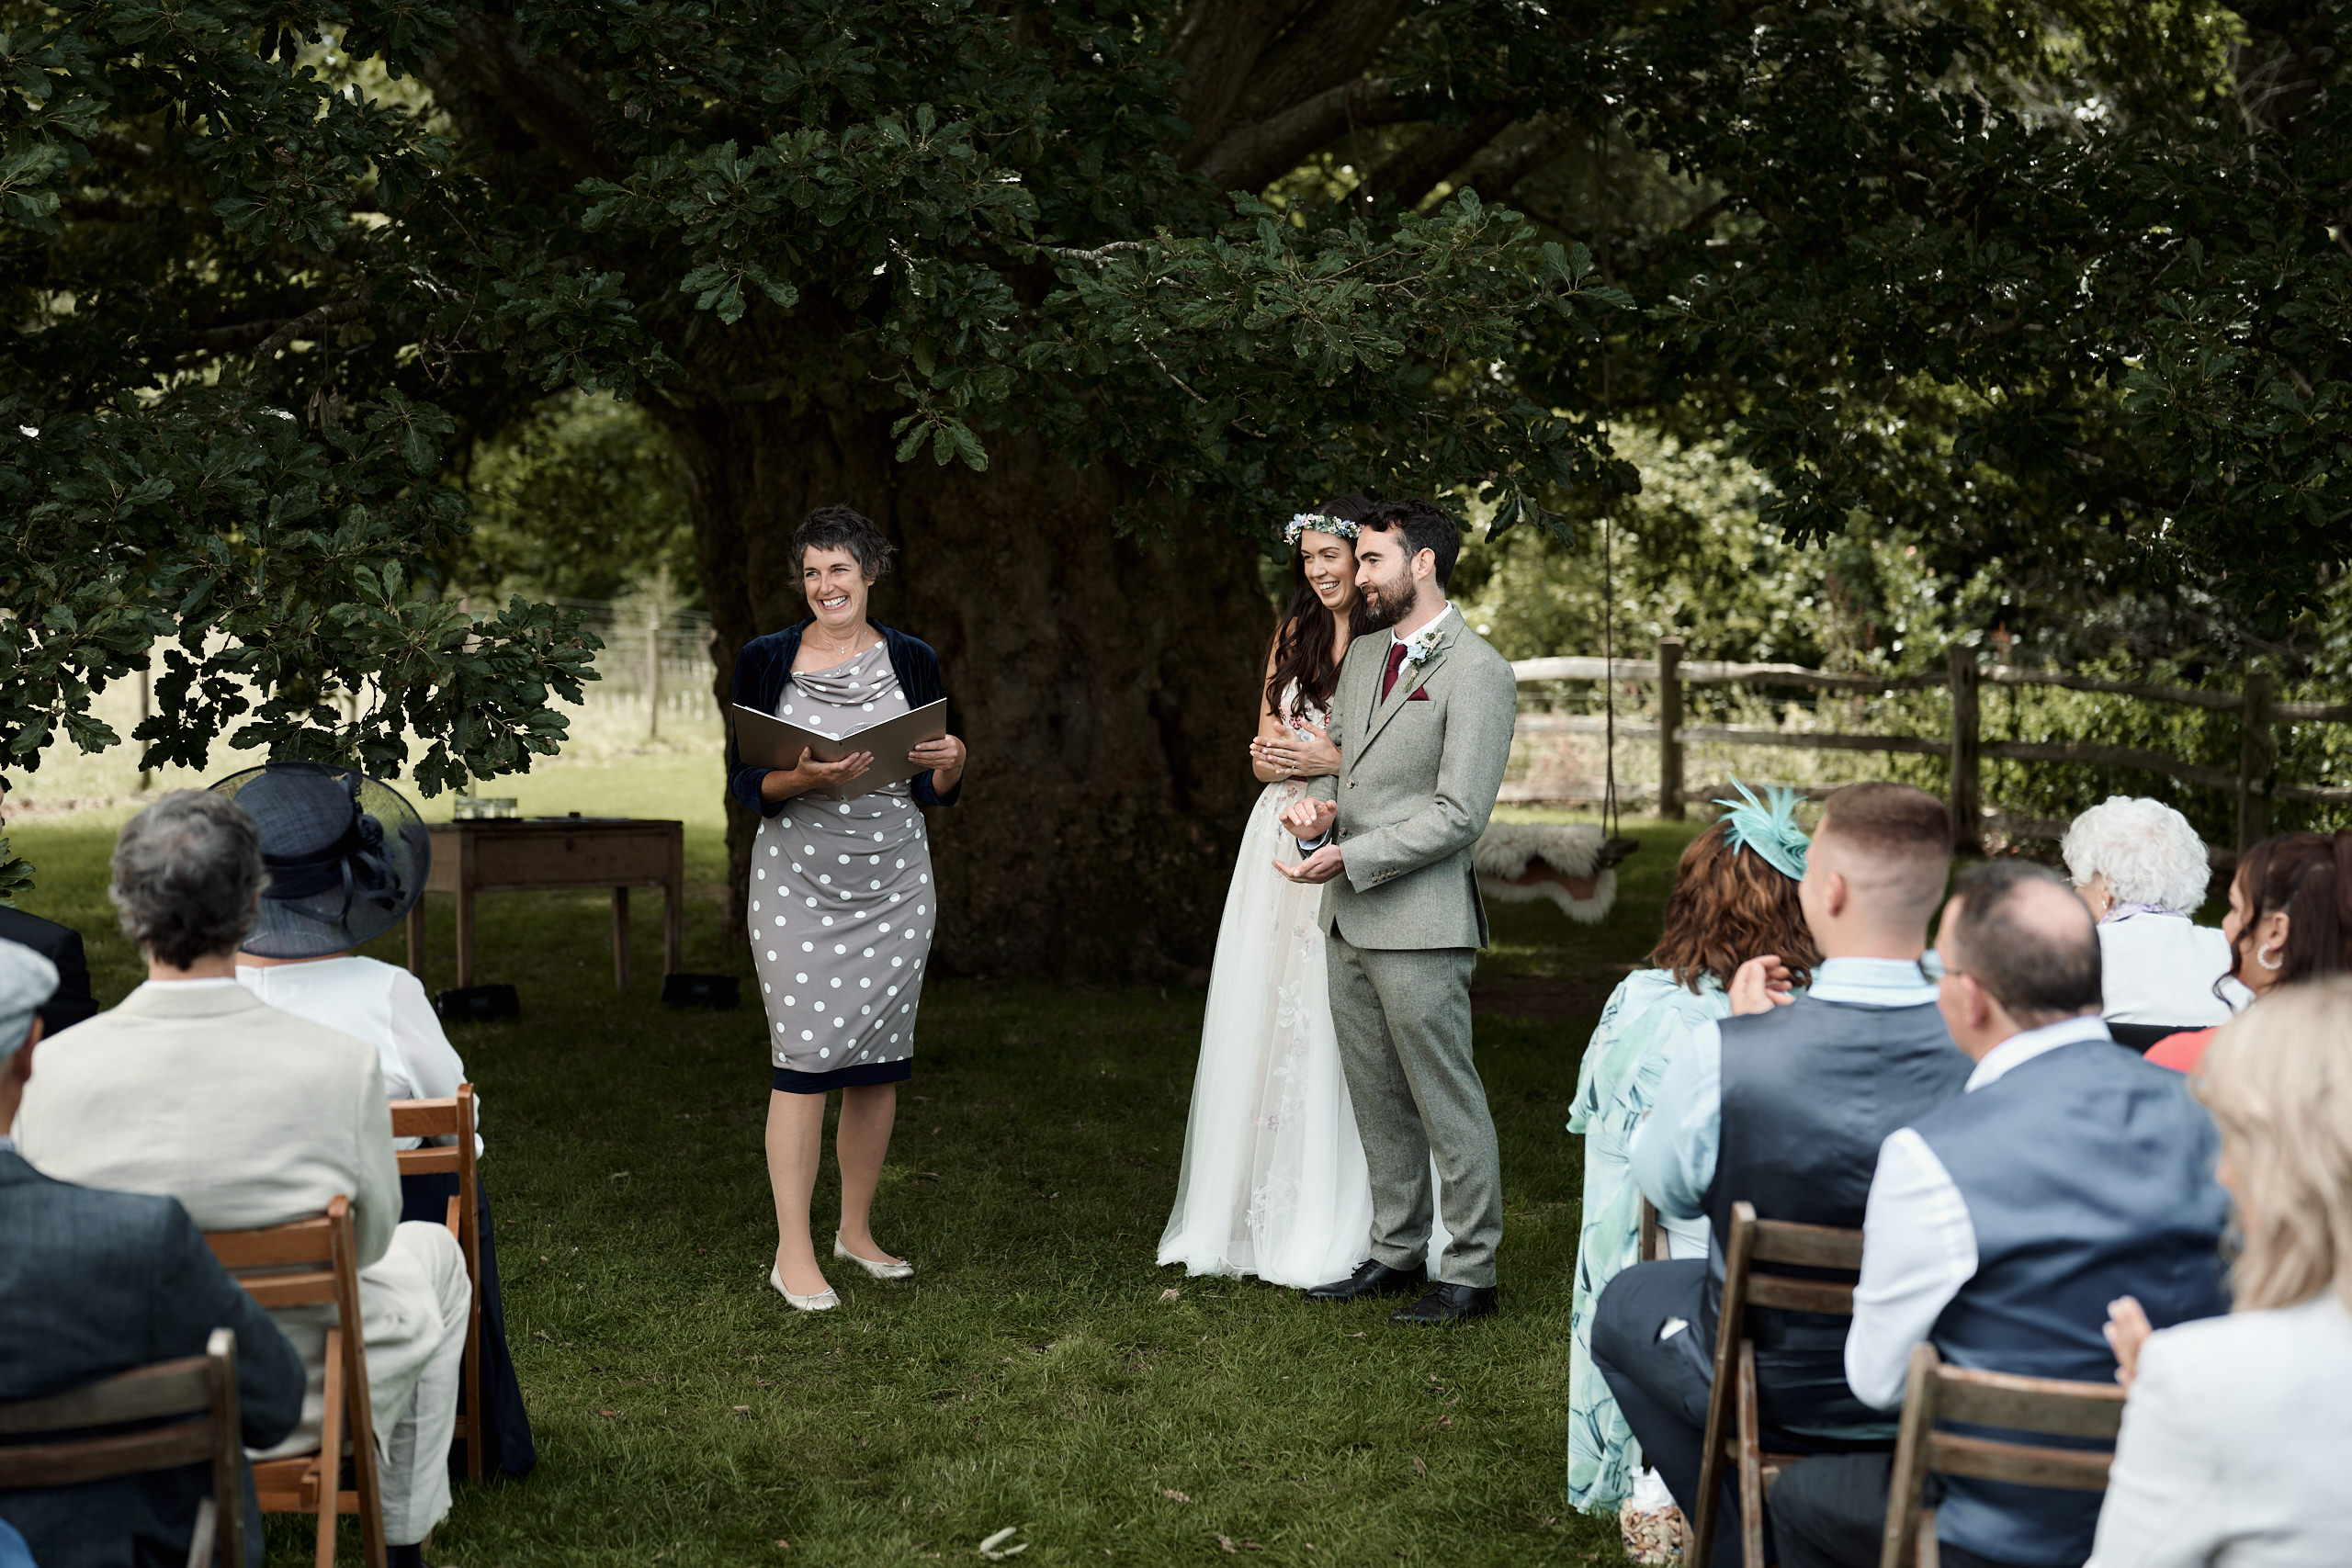 A couple getting married is standing under a tree during their wedding.